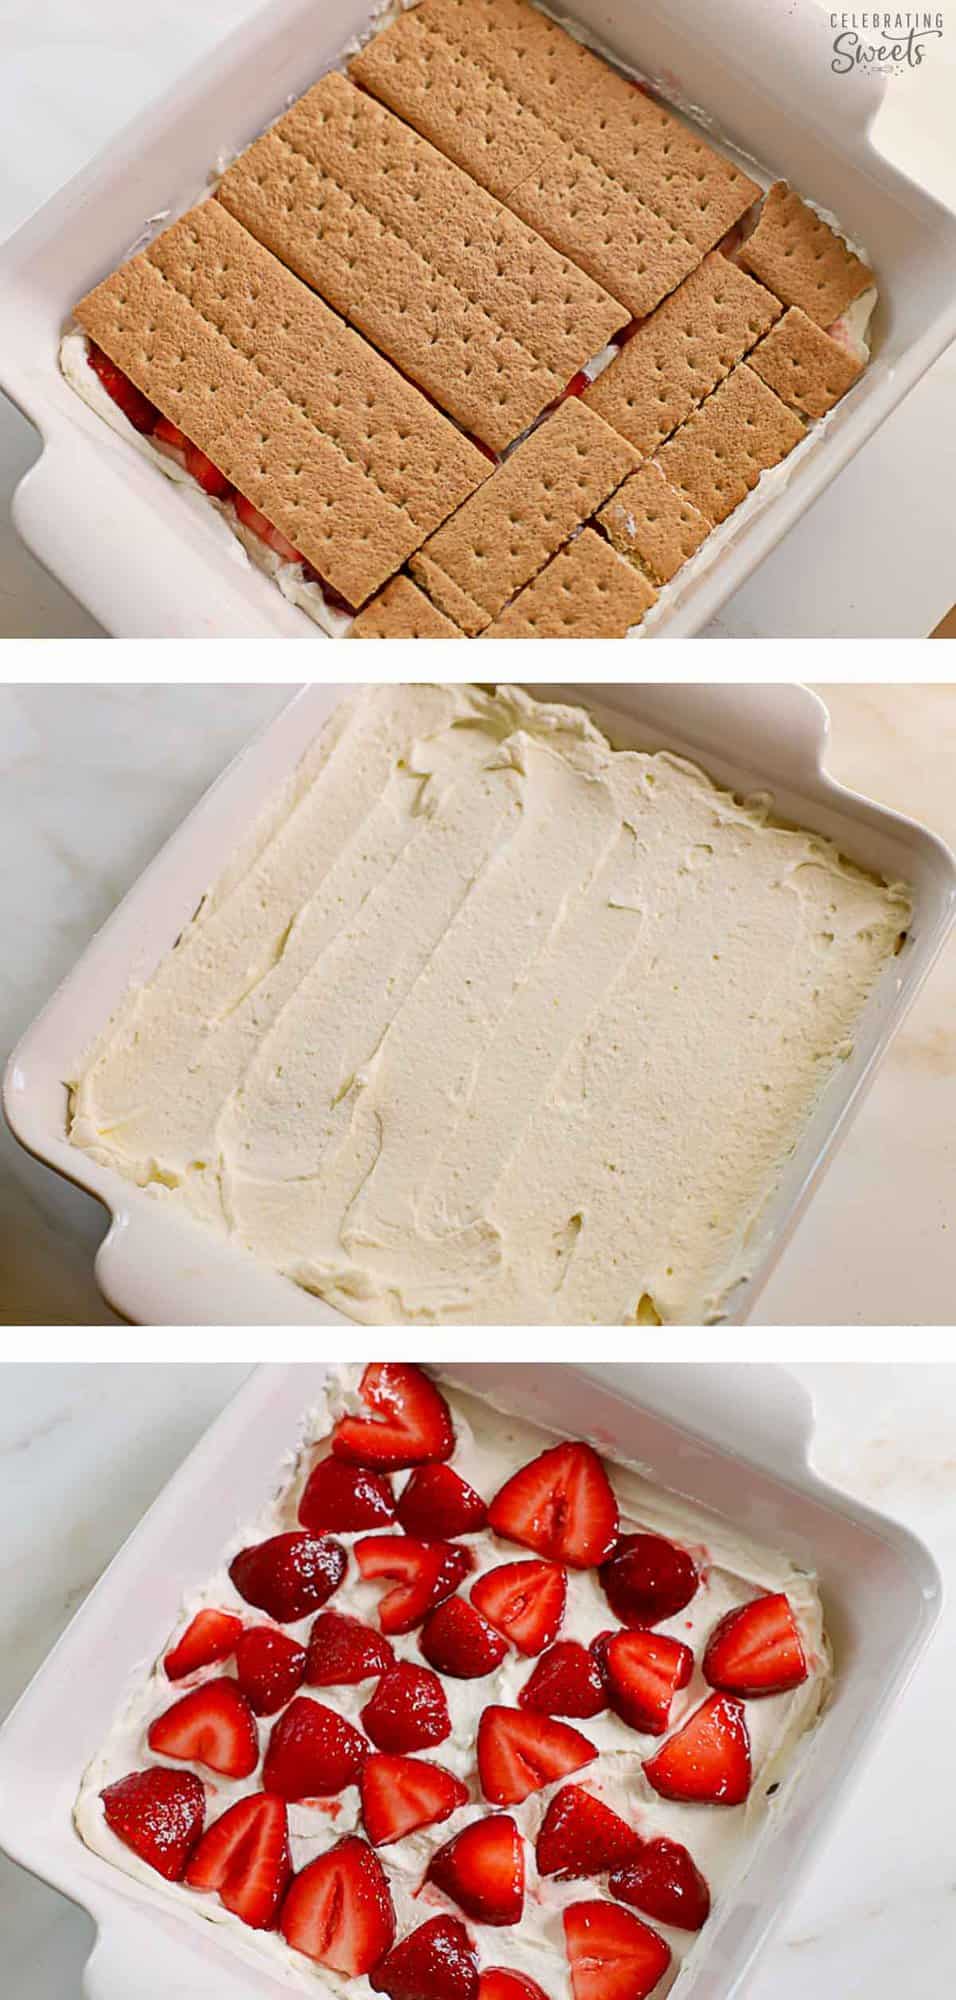 Collage showing how to make a strawberry icebox cake: graham crackers in a baking dish layered with whipped cream and sliced strawberries.